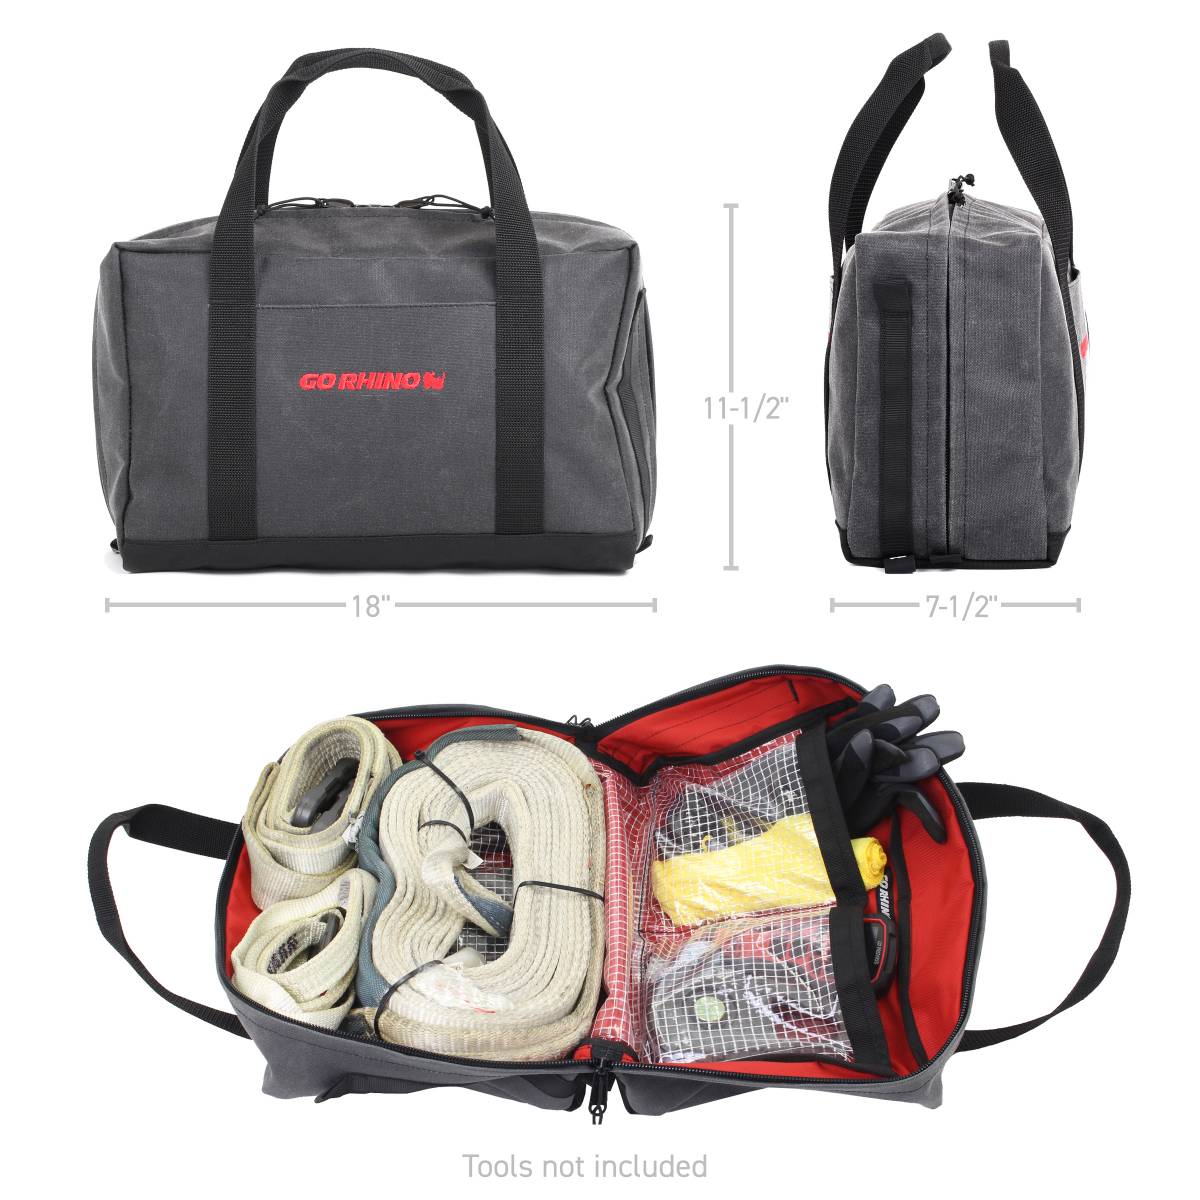 XVenture Gear Recovery Bag